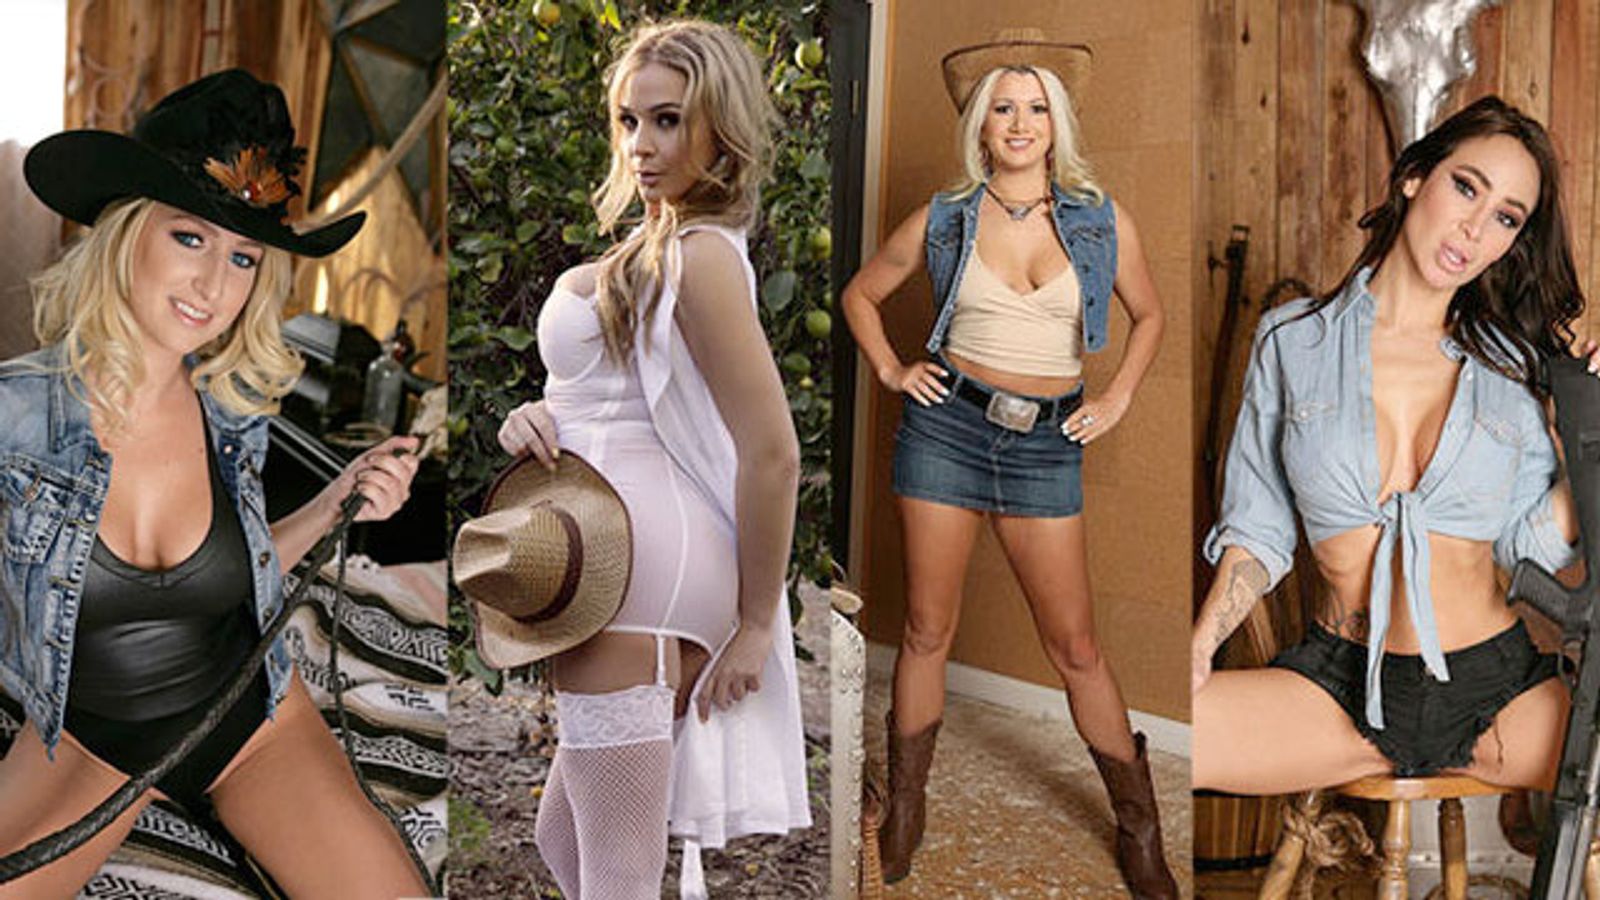 Kelly Madison Media to Release Cowboy-Themed ‘Rough Rider'